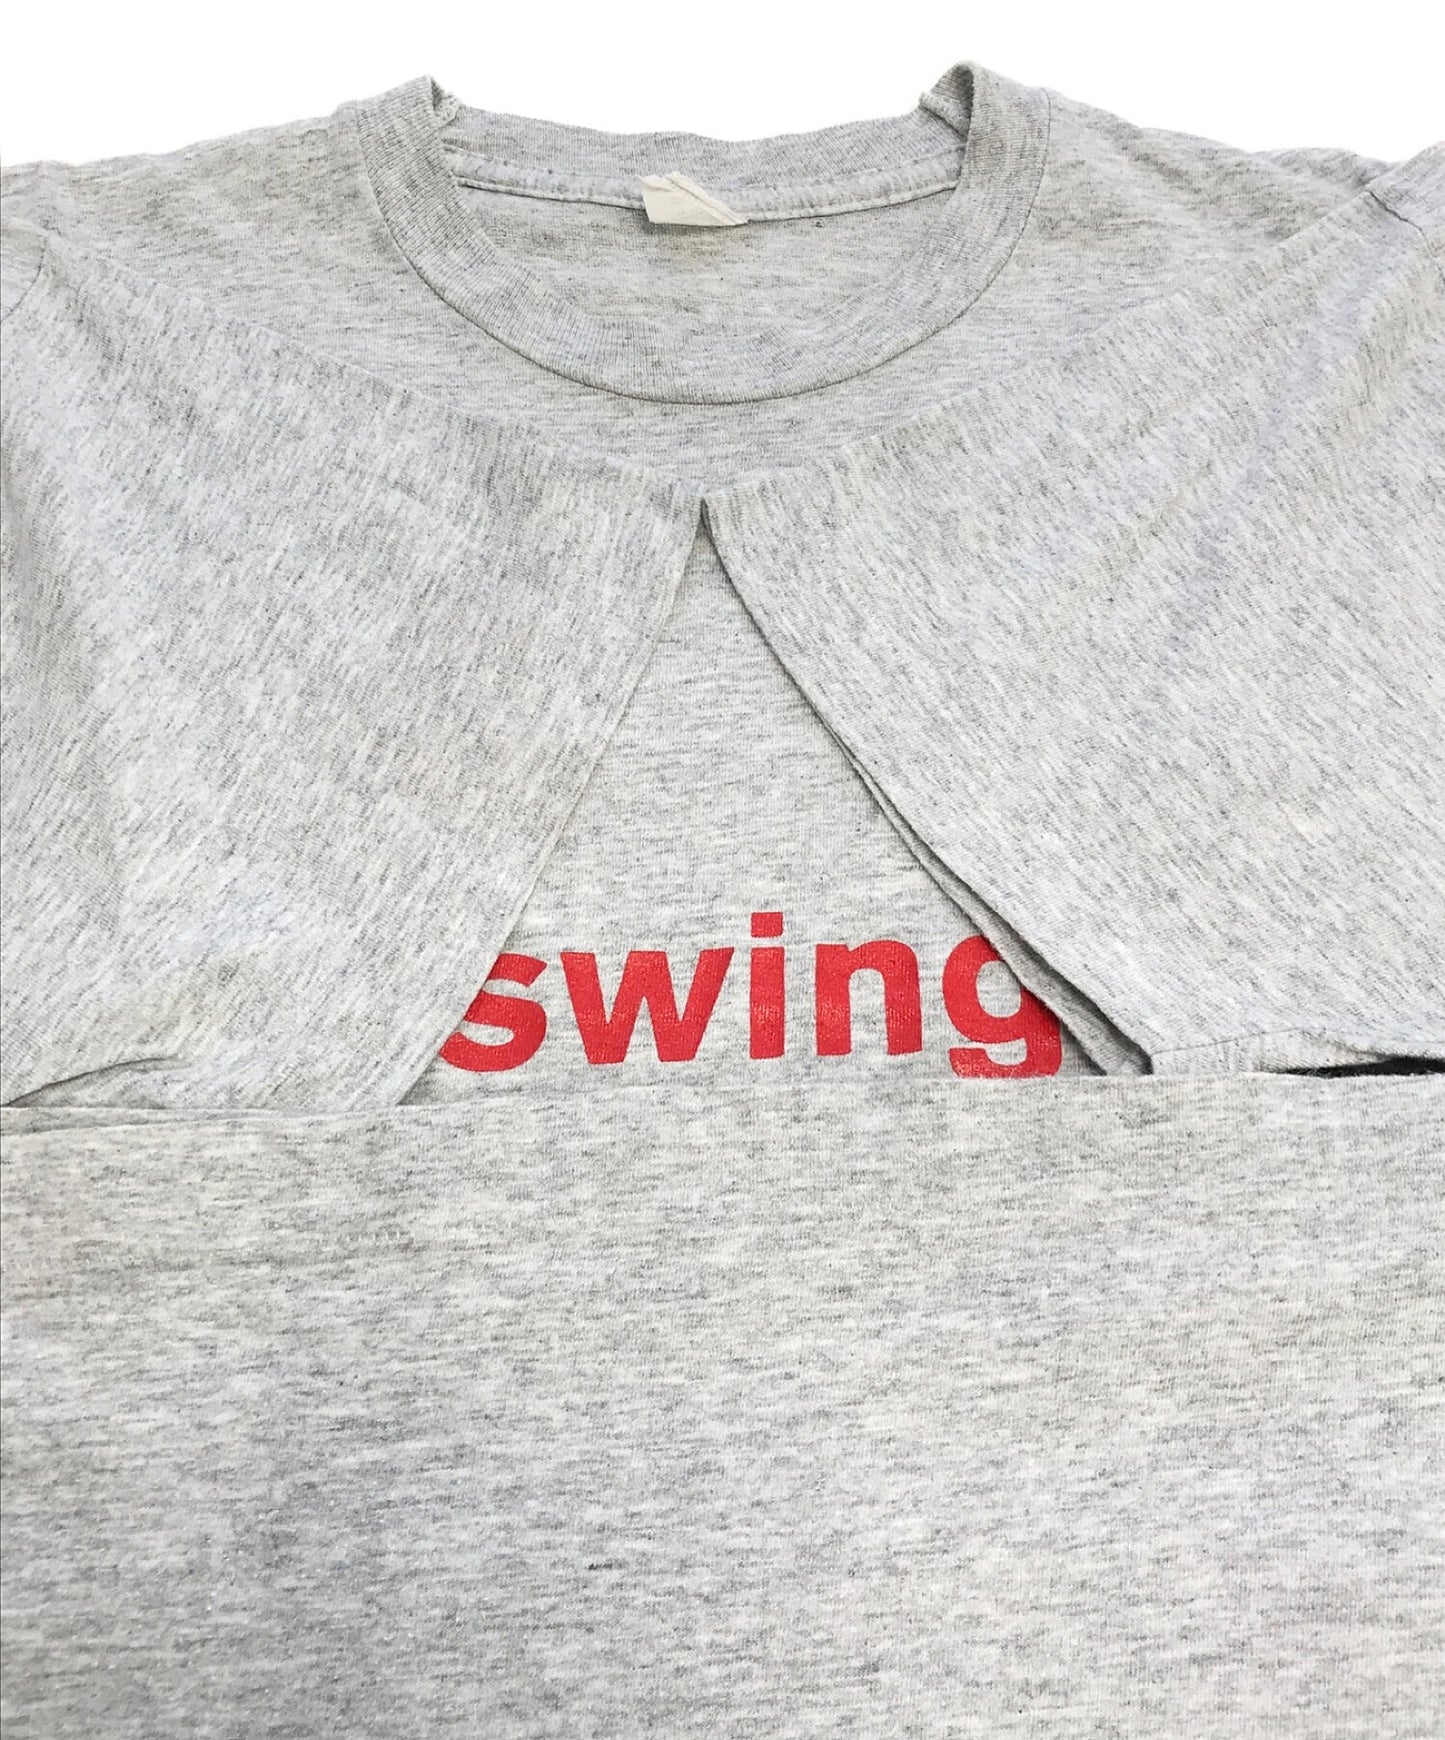 SWING OUT SISTER 92's Band T-Shirt